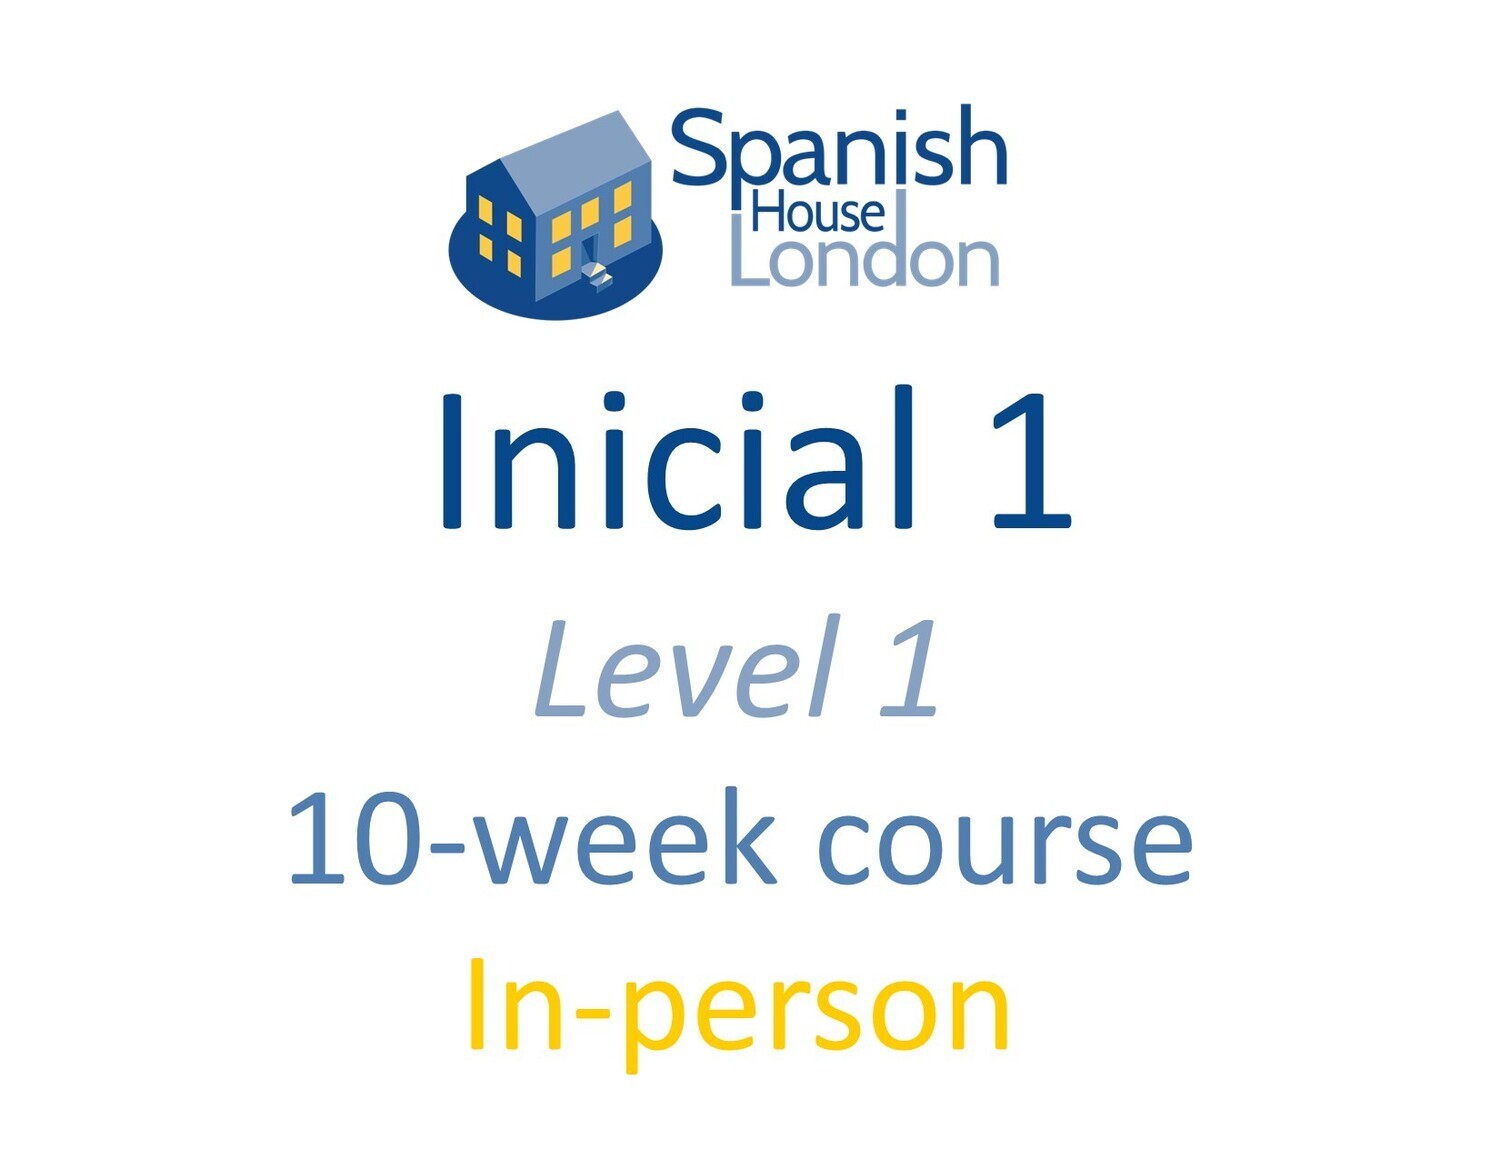 Inicial 1 Course starting on 15th May at 7.30pm in Clapham North